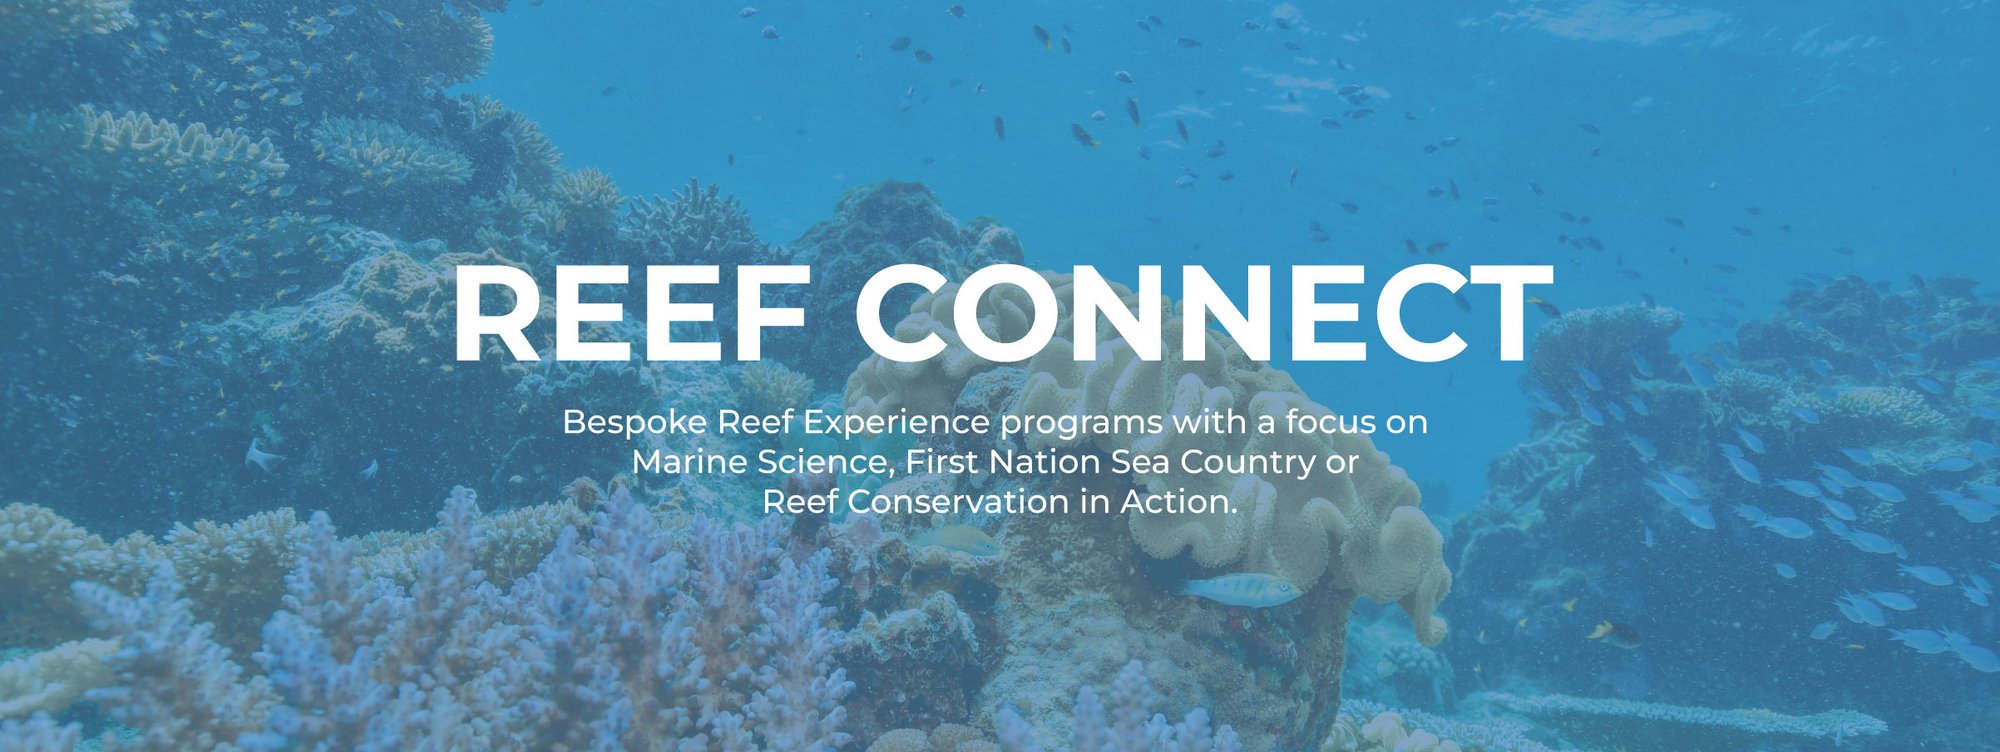 Reef-Connect-Banner